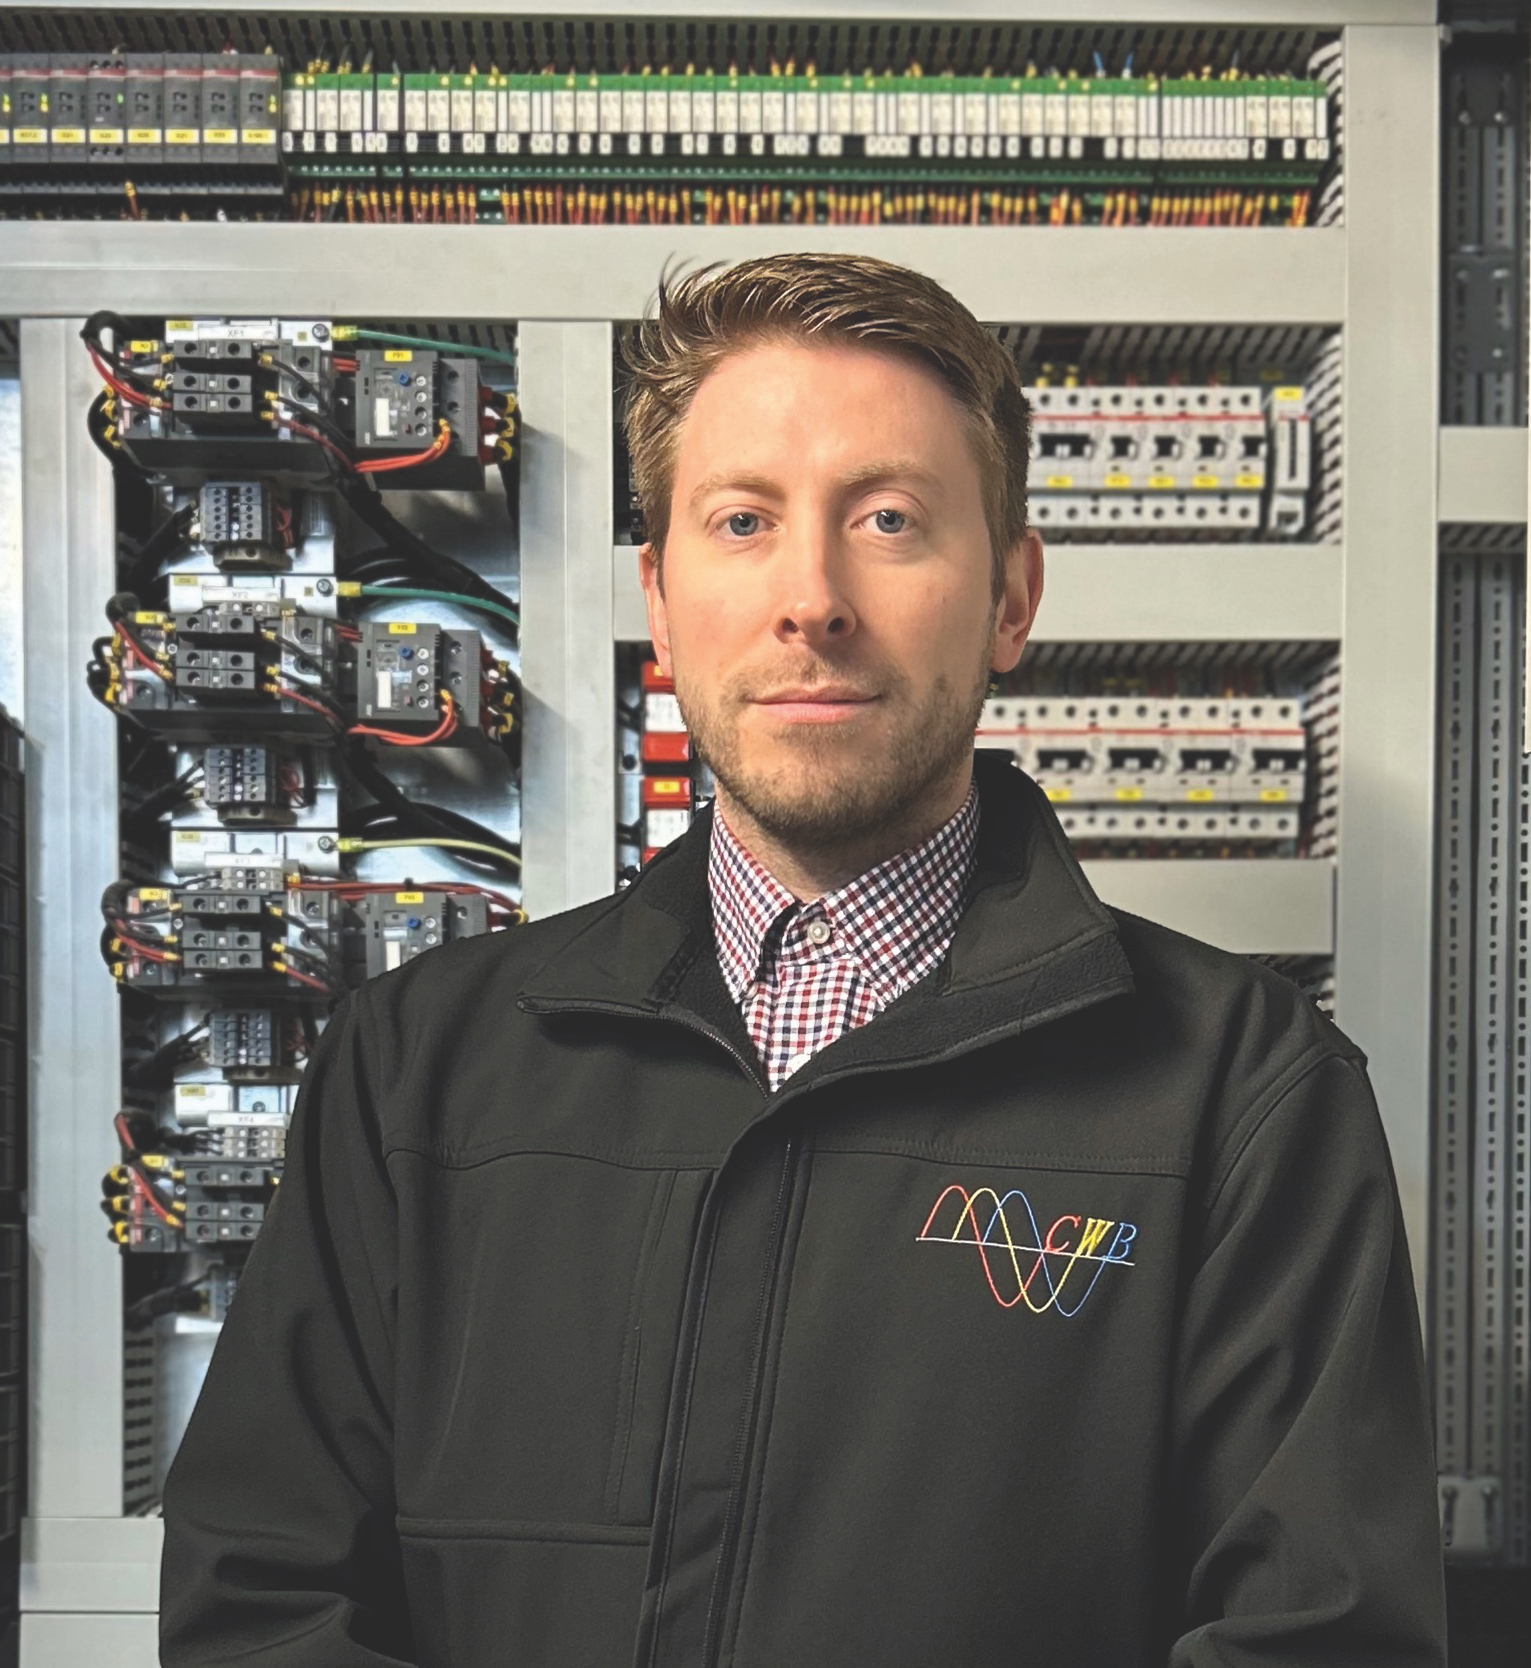 Chris Burton is a qualified engineer with over 20 years’ practical electrical engineering design and installation experience, and 10 years’ auto and testing experience. He founded CWB in 2012